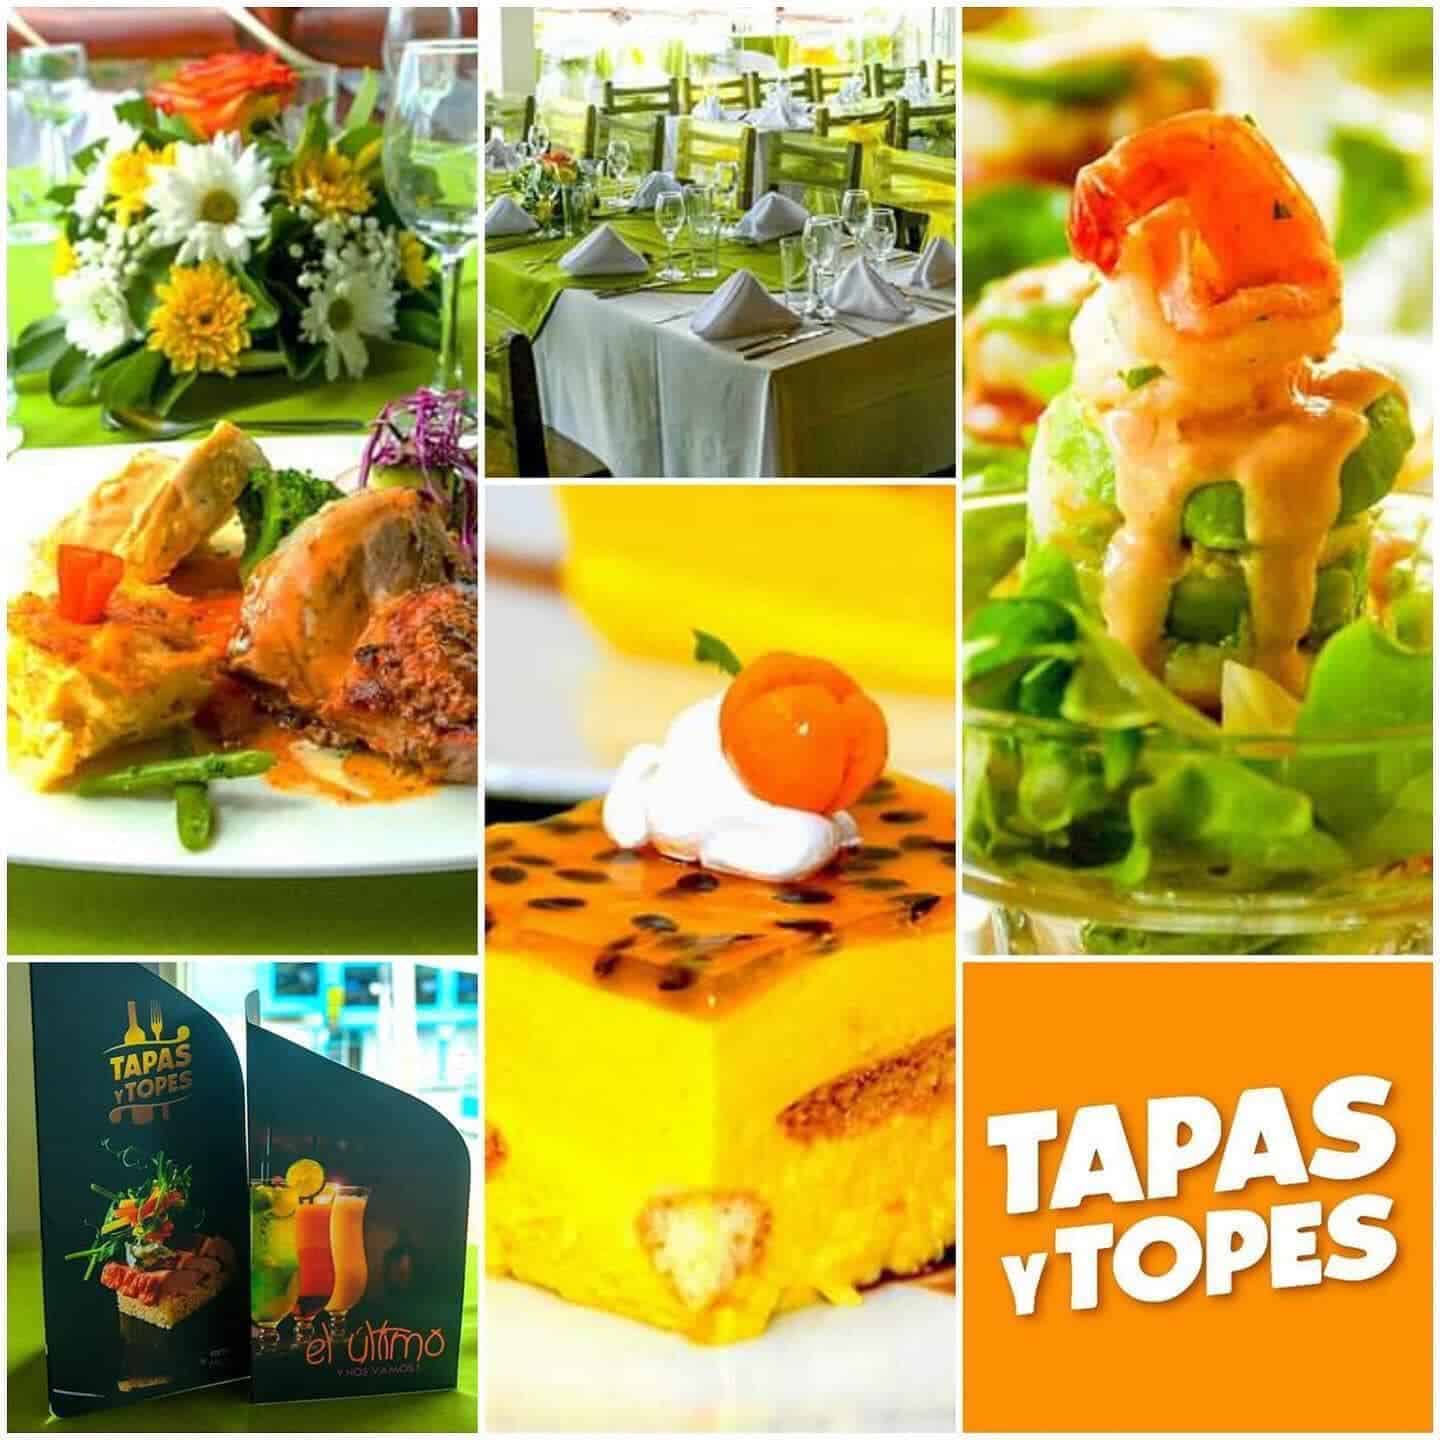 Restaurant Tapas y Topes Grill